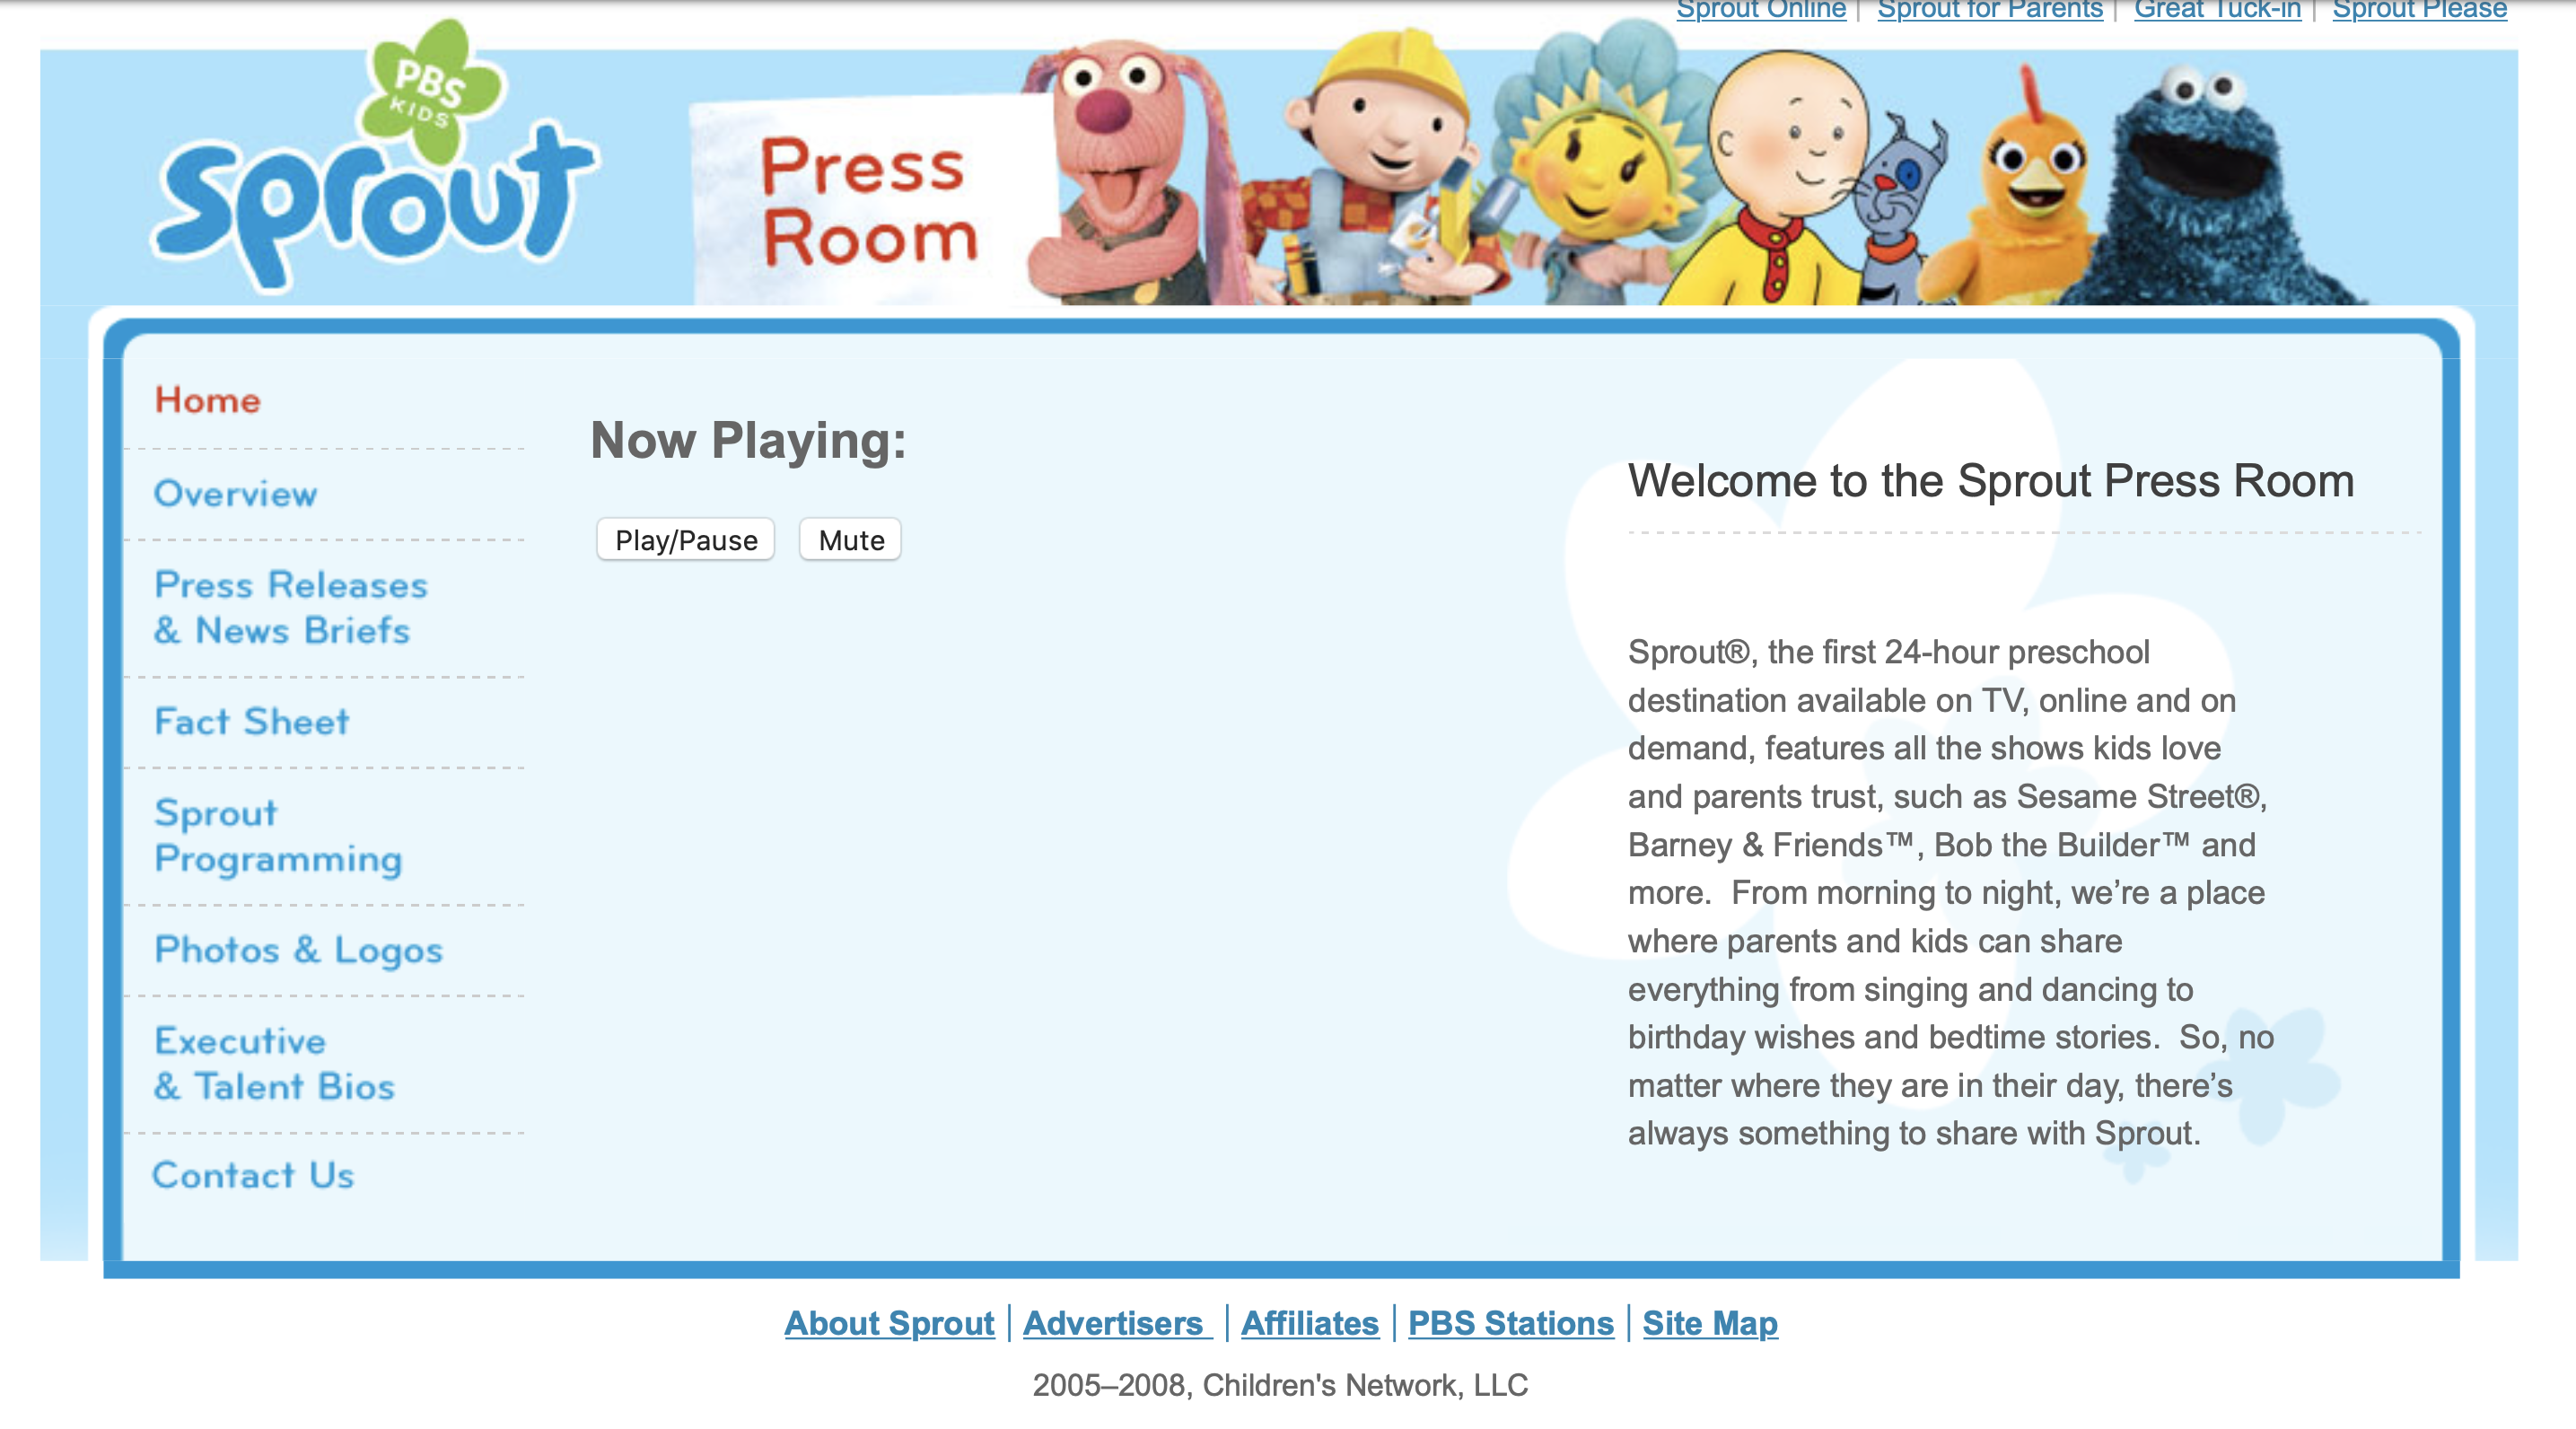 Play With Me Sesame (PBS Kids): United States daily TV audience